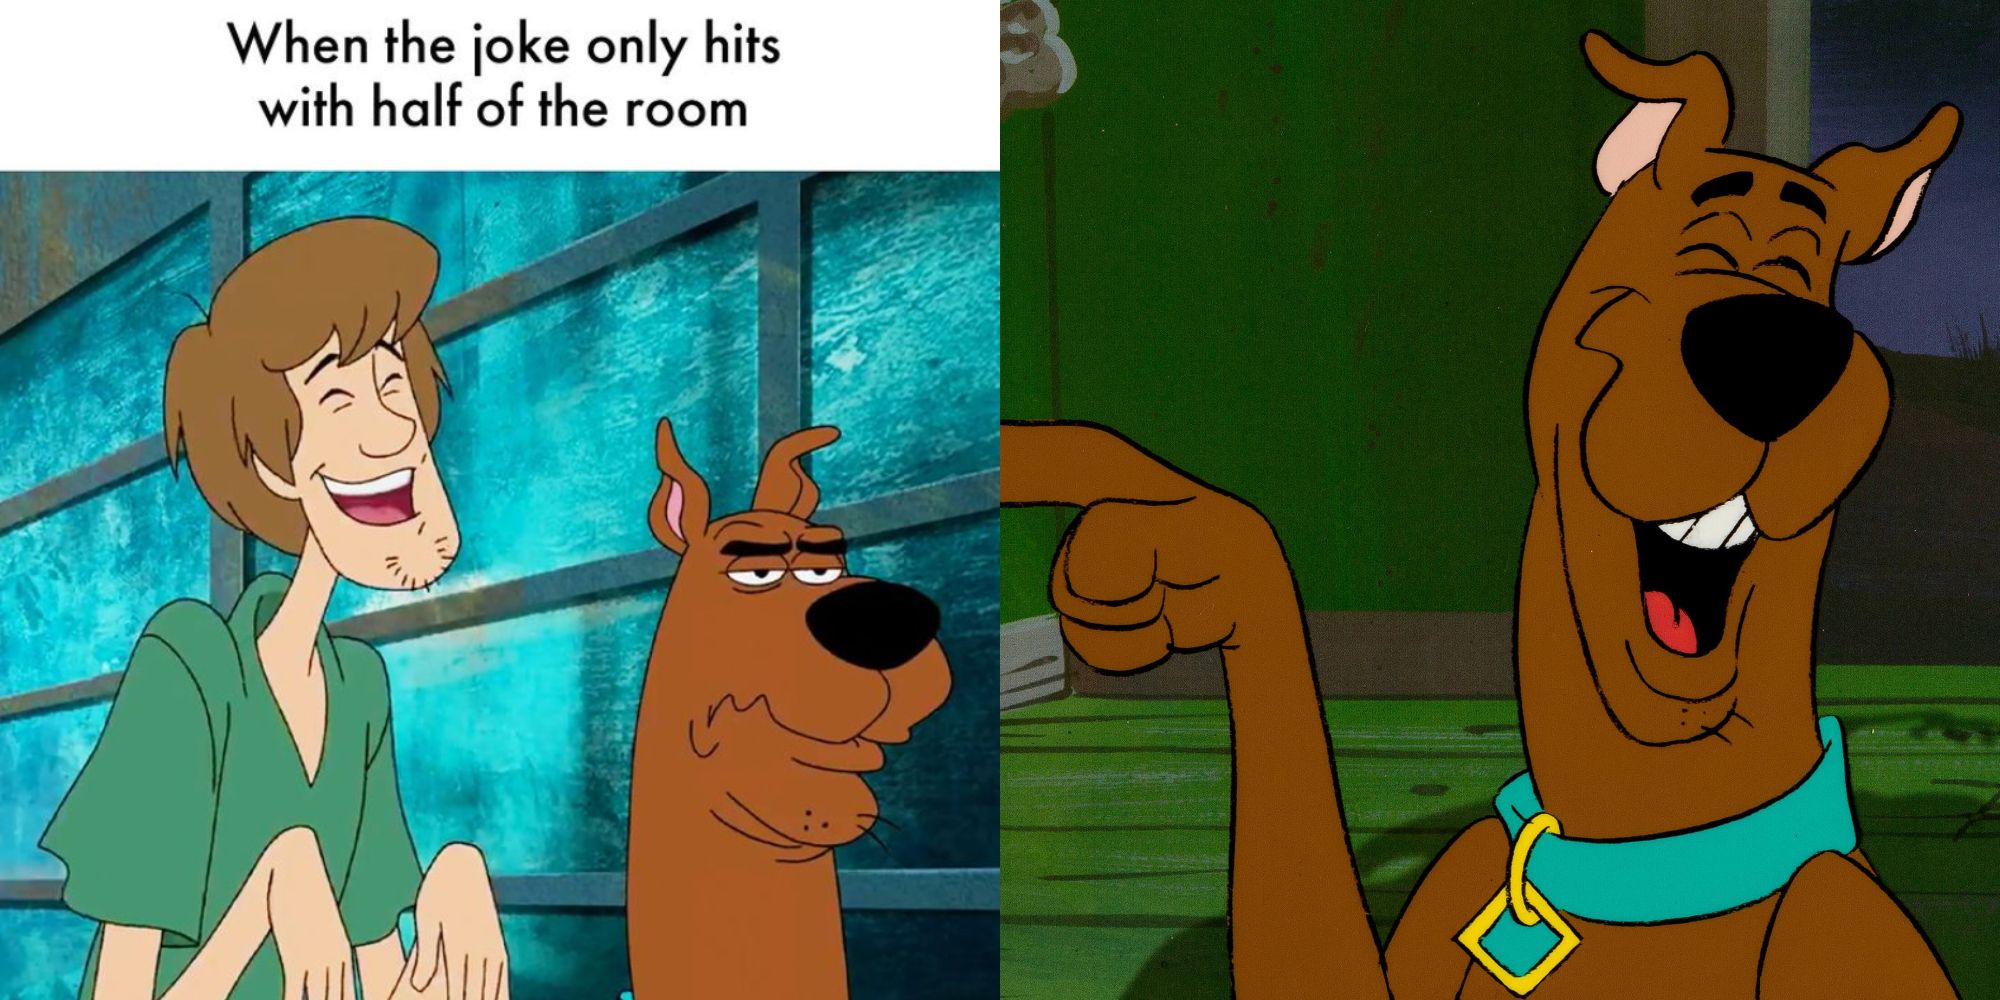 A Scooby Doo meme and an image of the character laughing